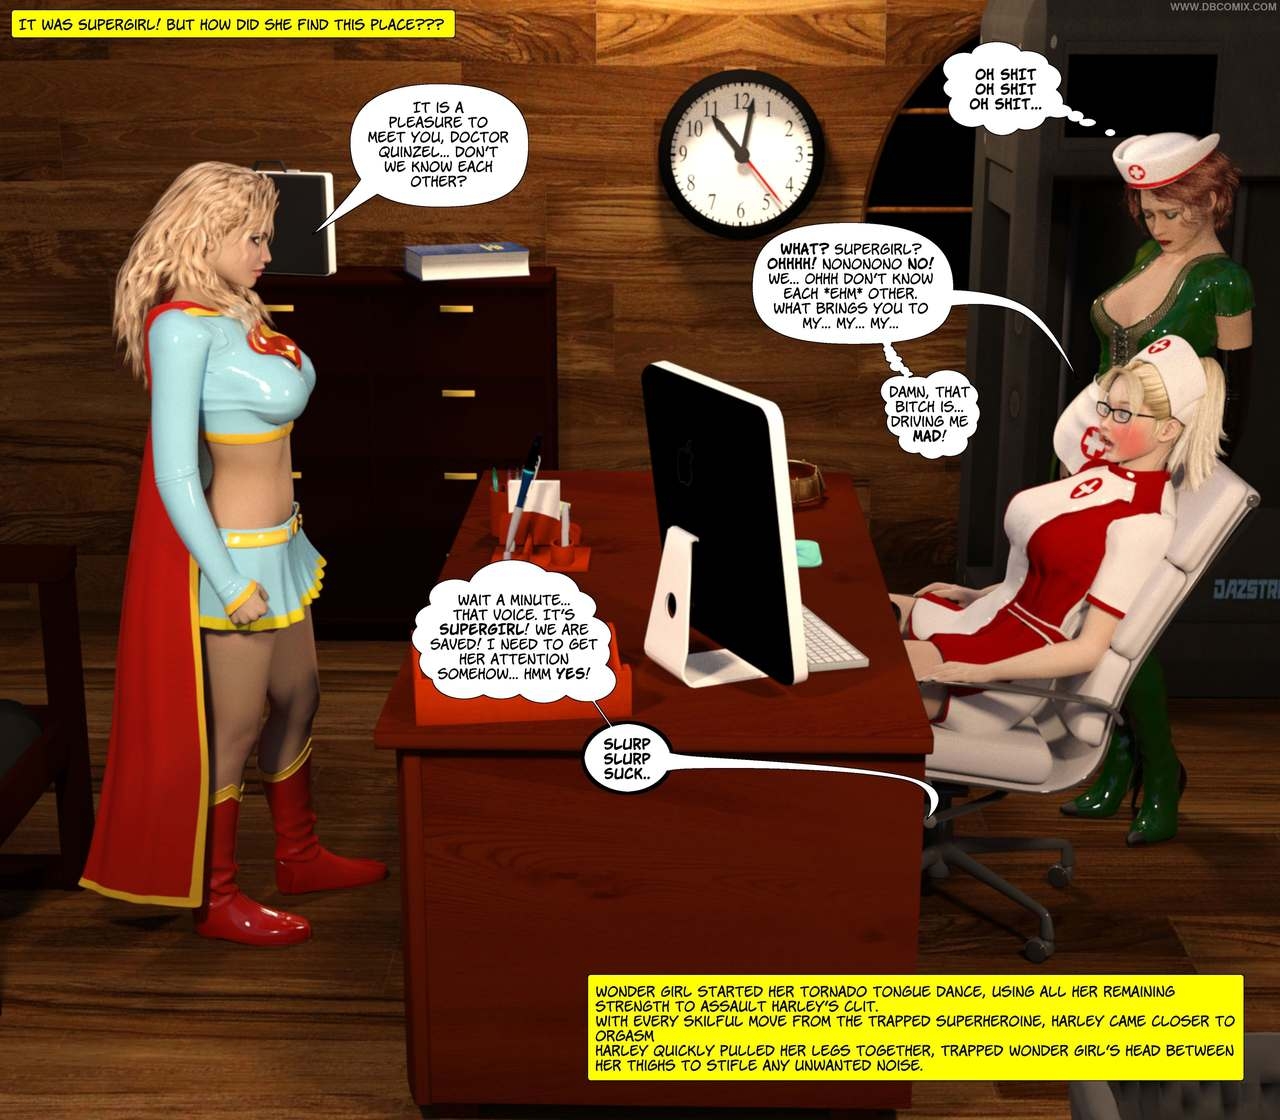 [DBComix] New Arkham for Superheroines 5 - All Work and No Play 64